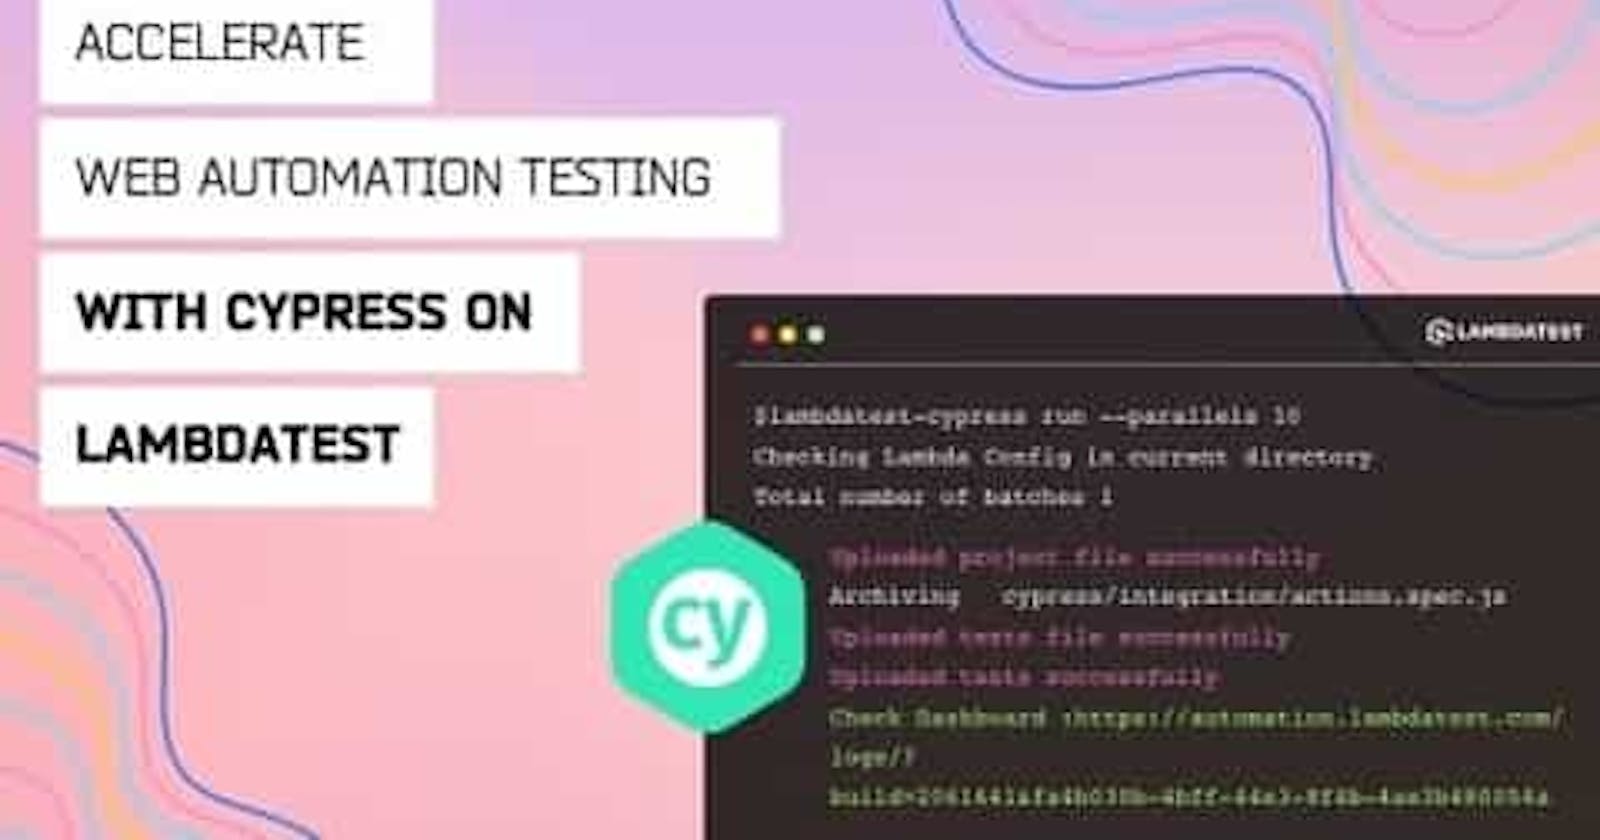 Now Run Your Cypress Tests On LambdaTest